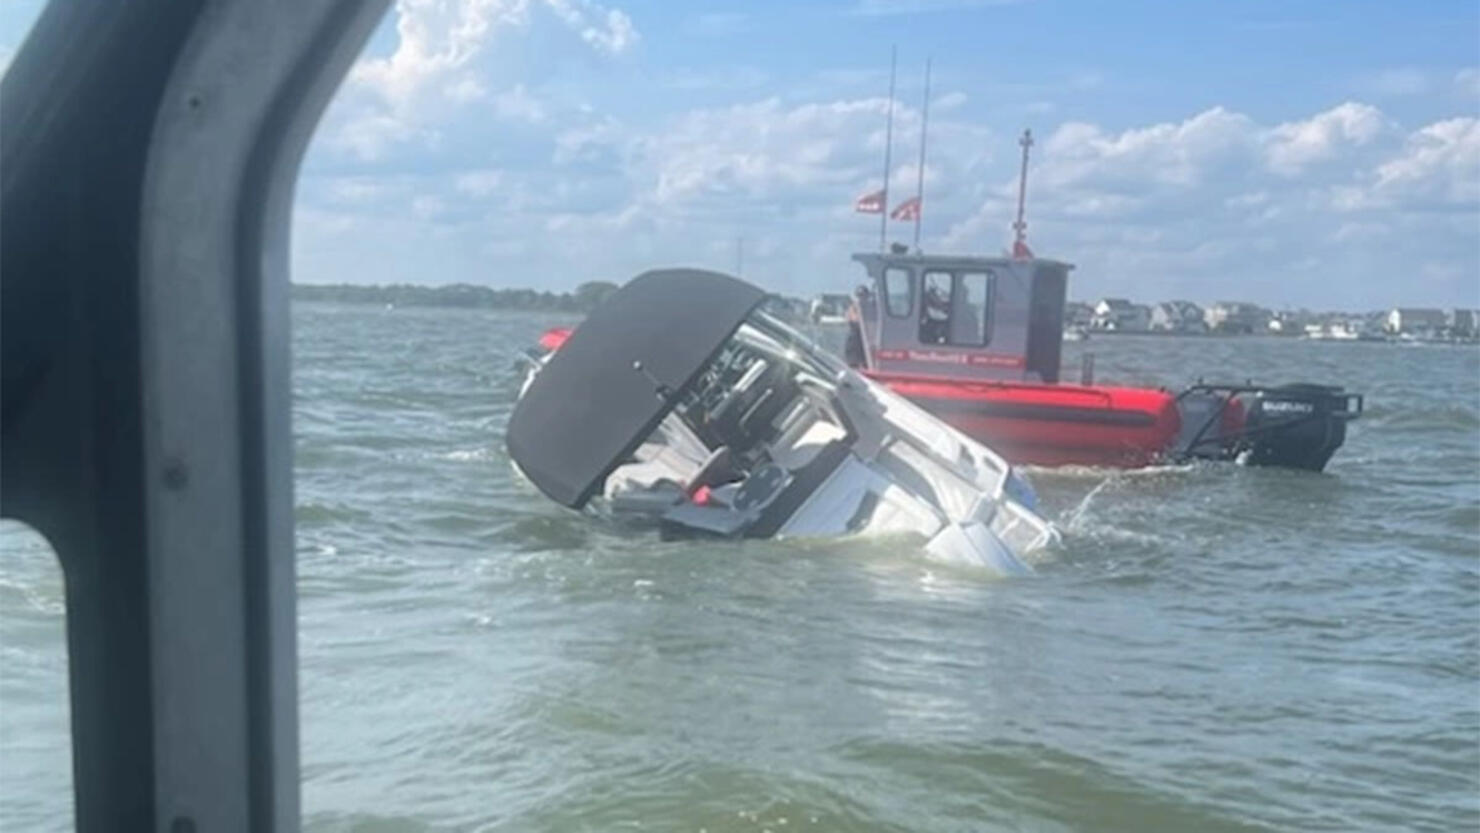 Coast Guard rescues 4 people, dog from sinking boat in Barnegat Bay, New Jersey